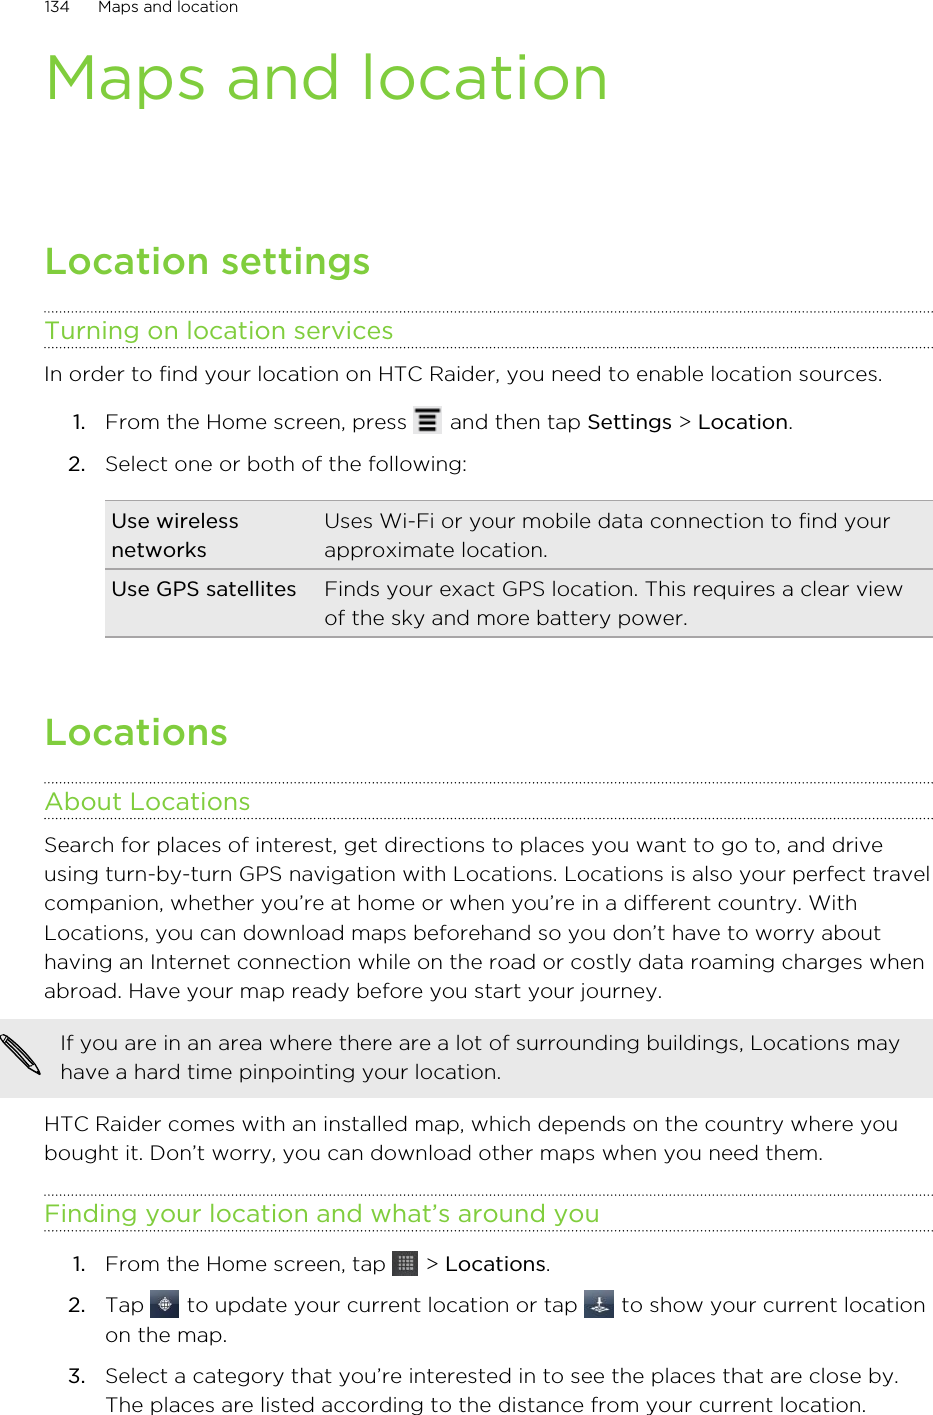 Maps and locationLocation settingsTurning on location servicesIn order to find your location on HTC Raider, you need to enable location sources.1. From the Home screen, press   and then tap Settings &gt; Location.2. Select one or both of the following:Use wirelessnetworksUses Wi-Fi or your mobile data connection to find yourapproximate location.Use GPS satellites Finds your exact GPS location. This requires a clear viewof the sky and more battery power.LocationsAbout LocationsSearch for places of interest, get directions to places you want to go to, and driveusing turn-by-turn GPS navigation with Locations. Locations is also your perfect travelcompanion, whether you’re at home or when you’re in a different country. WithLocations, you can download maps beforehand so you don’t have to worry abouthaving an Internet connection while on the road or costly data roaming charges whenabroad. Have your map ready before you start your journey.If you are in an area where there are a lot of surrounding buildings, Locations mayhave a hard time pinpointing your location.HTC Raider comes with an installed map, which depends on the country where youbought it. Don’t worry, you can download other maps when you need them.Finding your location and what’s around you1. From the Home screen, tap   &gt; Locations.2. Tap   to update your current location or tap   to show your current locationon the map.3. Select a category that you’re interested in to see the places that are close by.The places are listed according to the distance from your current location.134 Maps and location